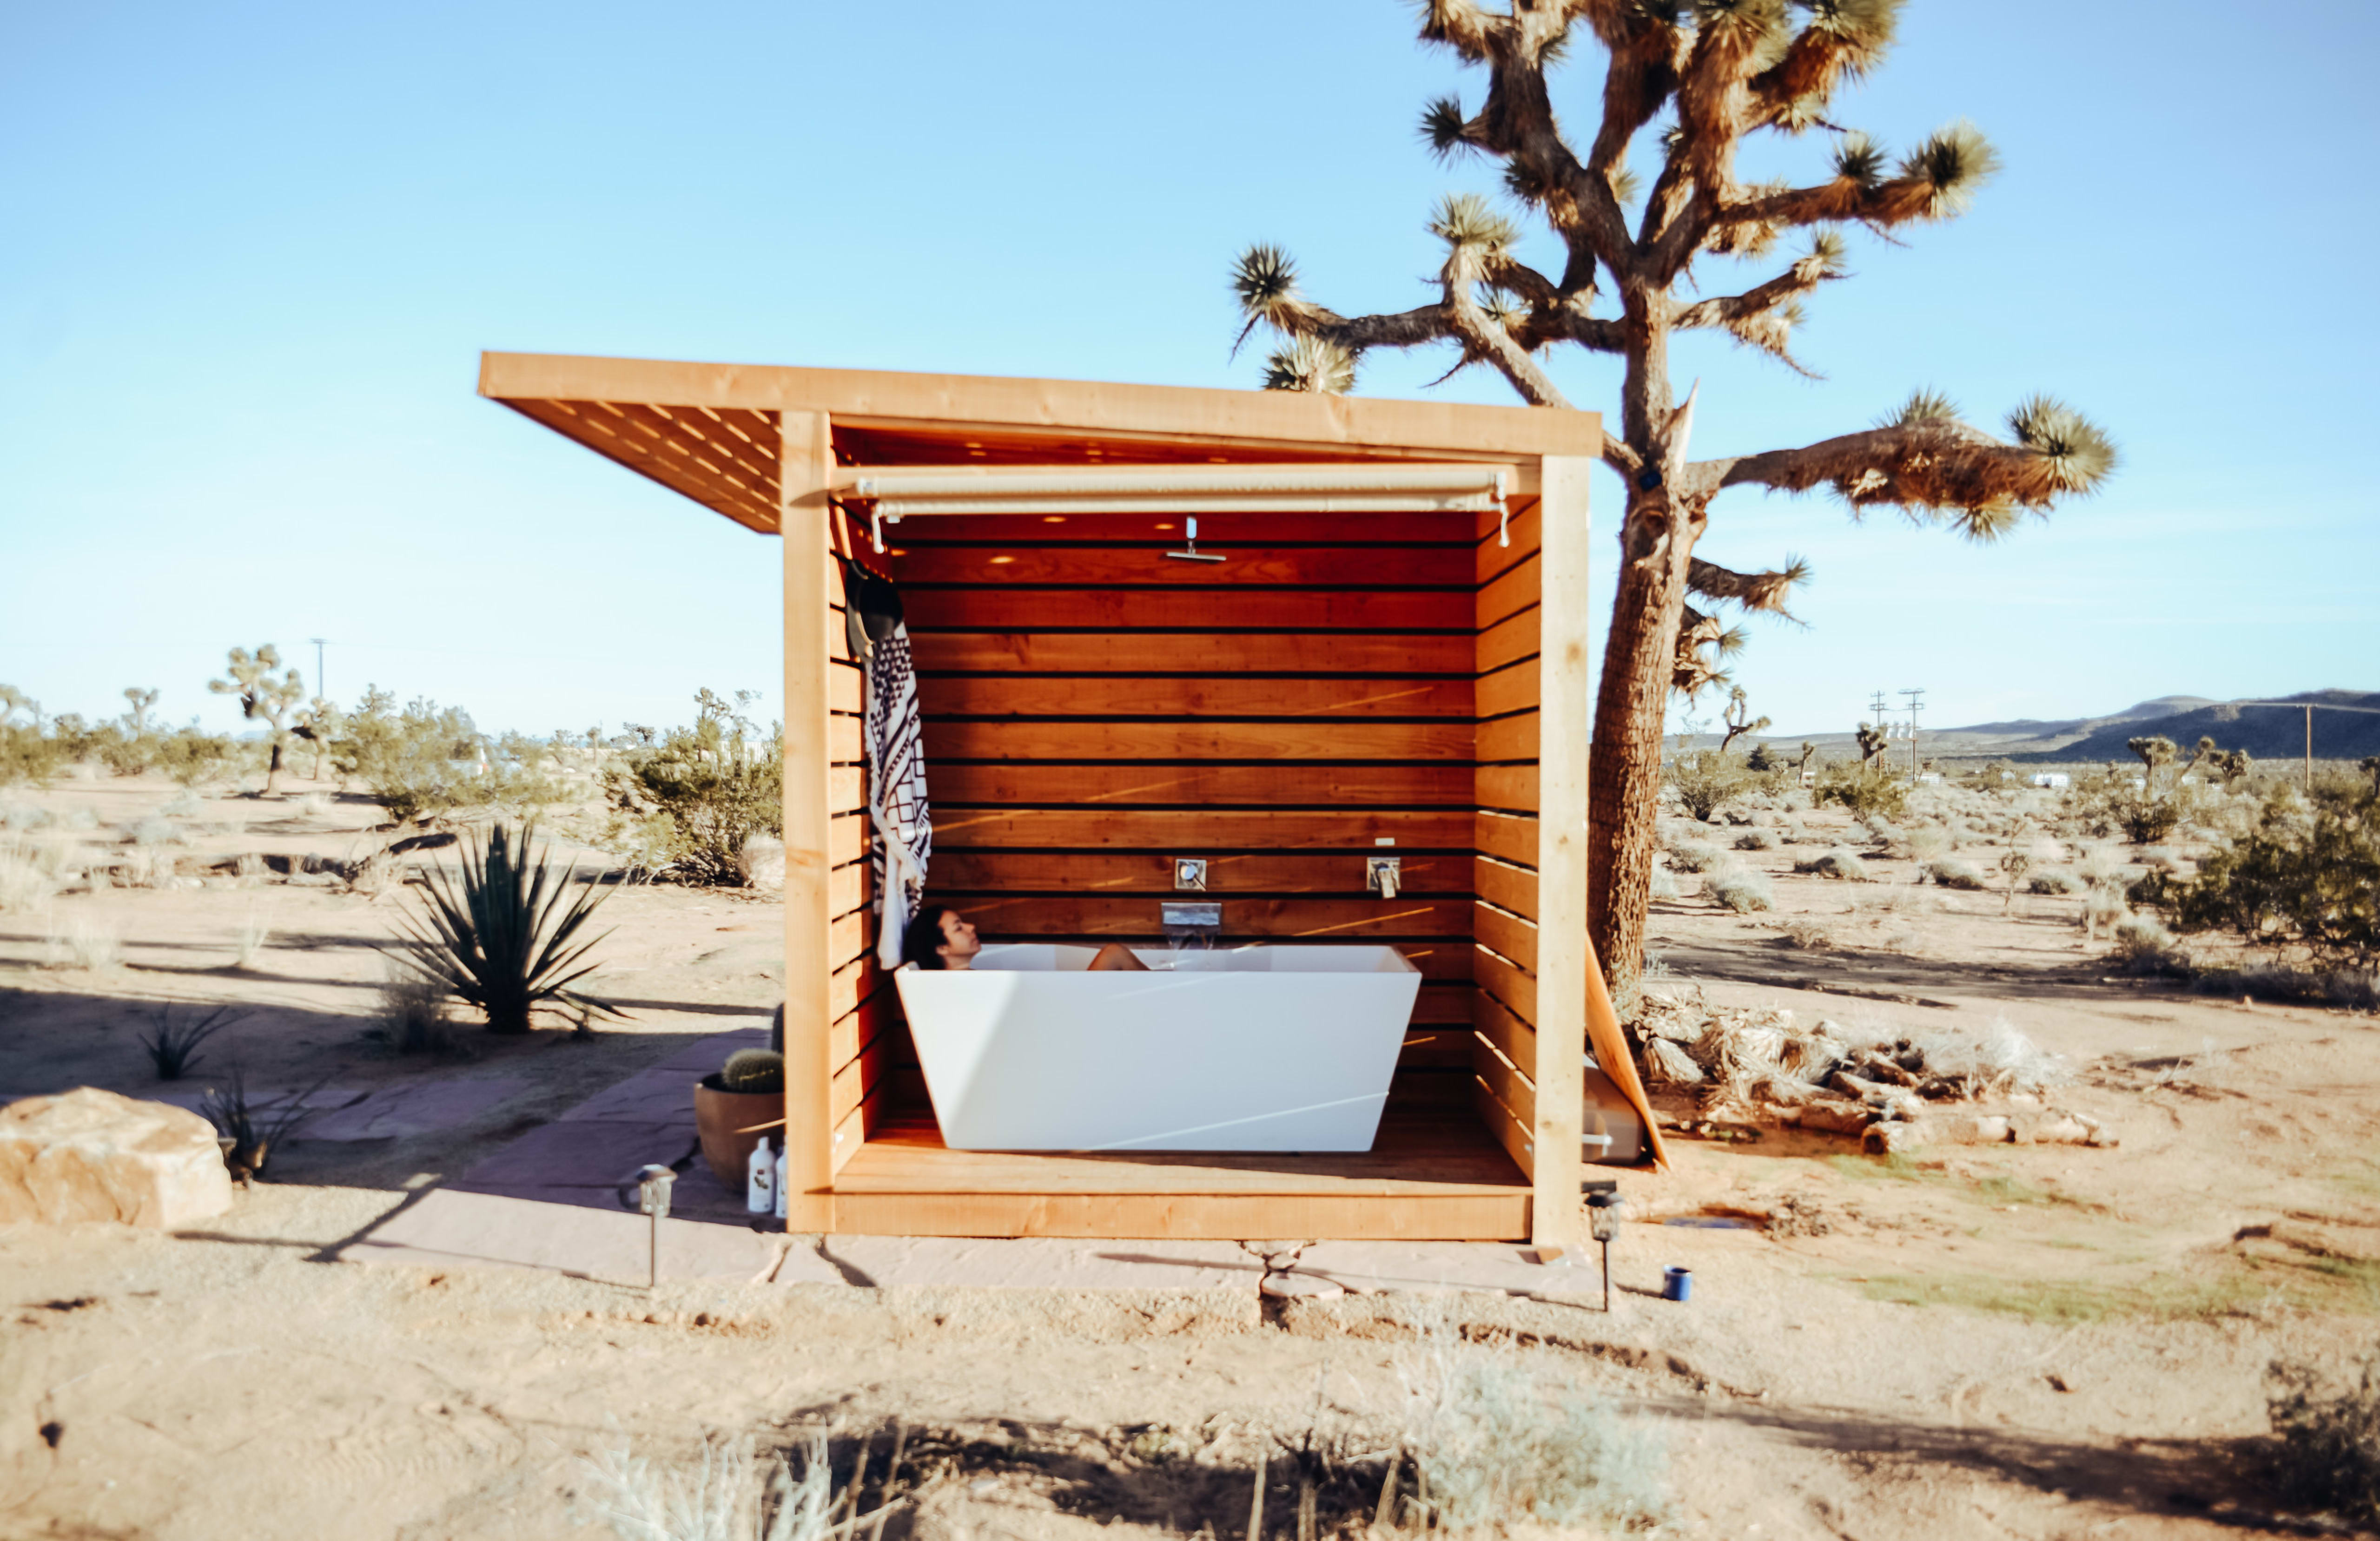 A gorgeous bathtub and shower at a Joshua Tree campsite on Hipcamp